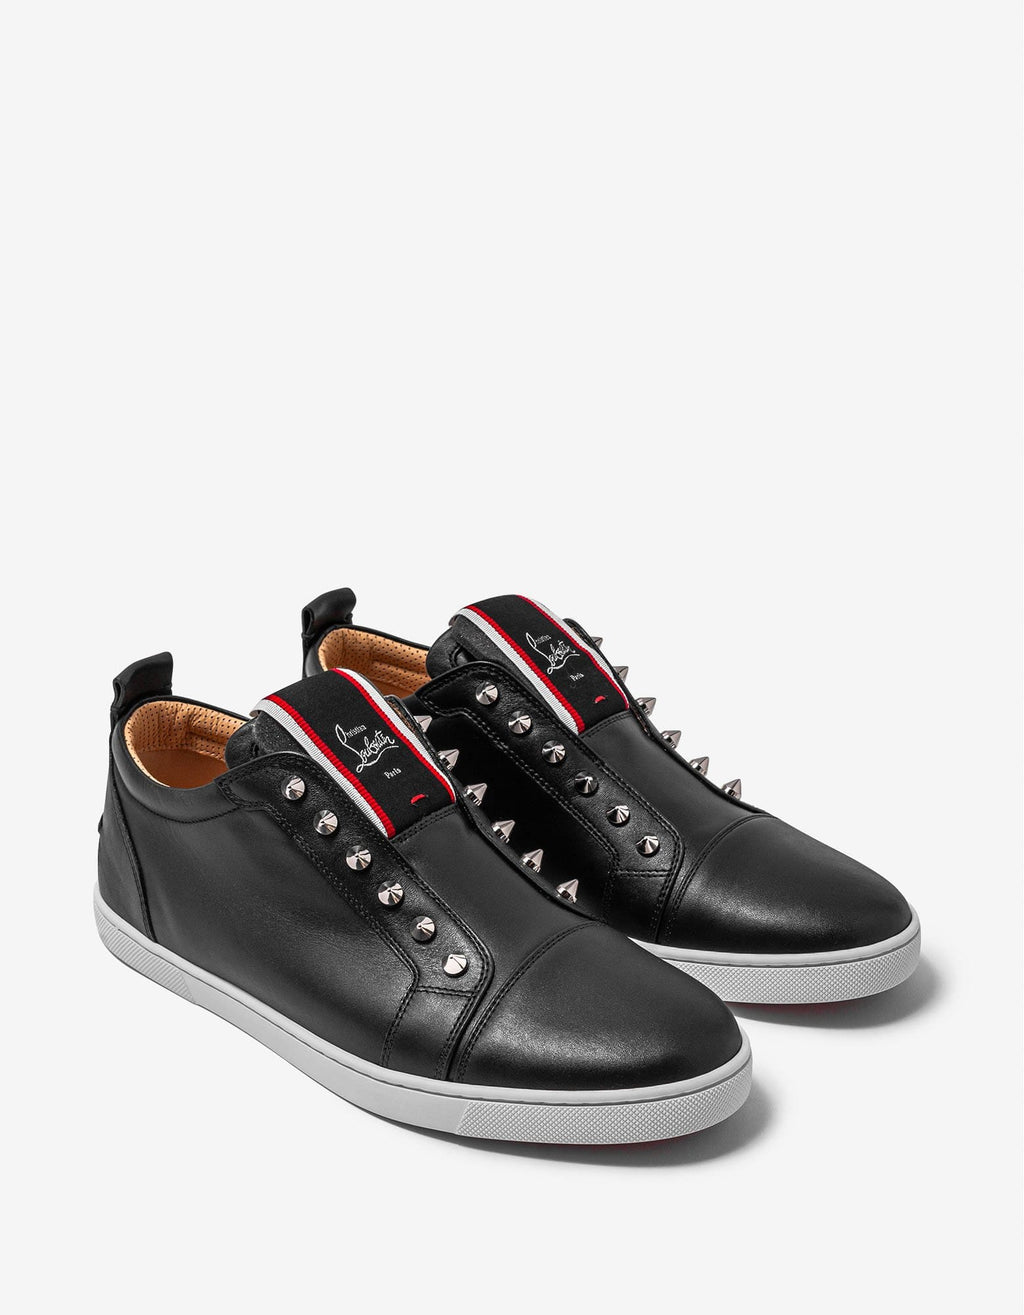 Christian Louboutin Christian Louboutin F.A.V Fique A Vontade Black Leather Trainers